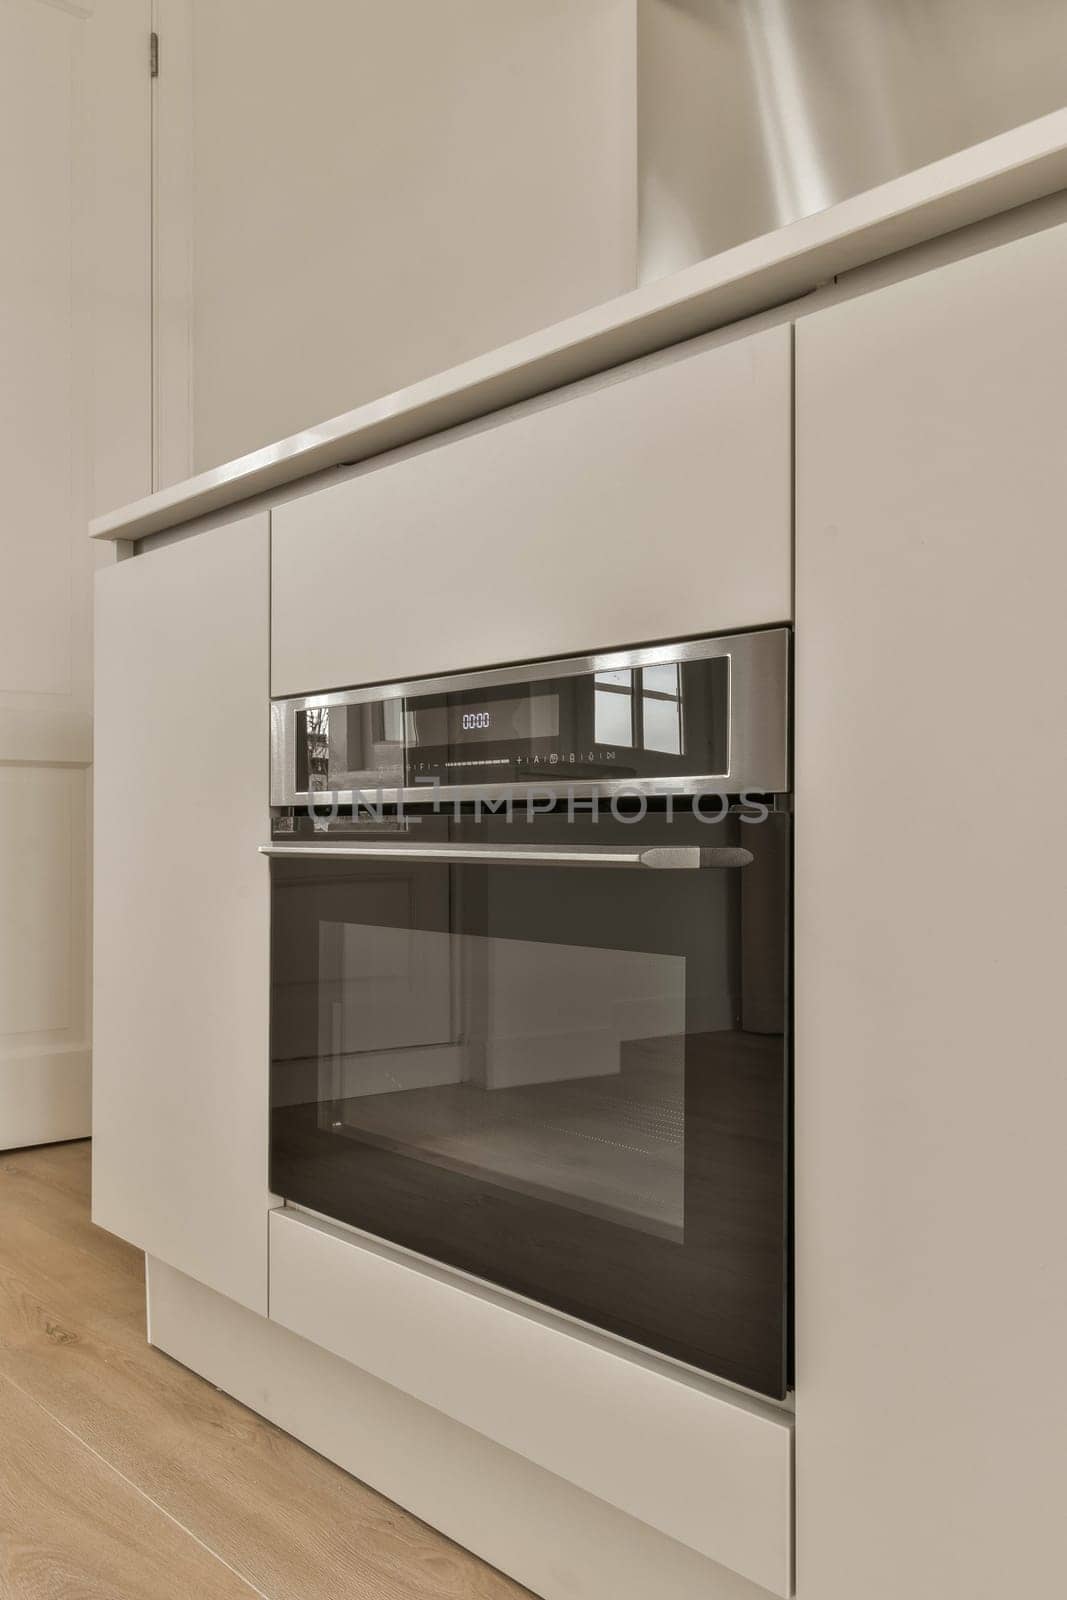 a kitchen with white cabinets and an oven in it by casamedia